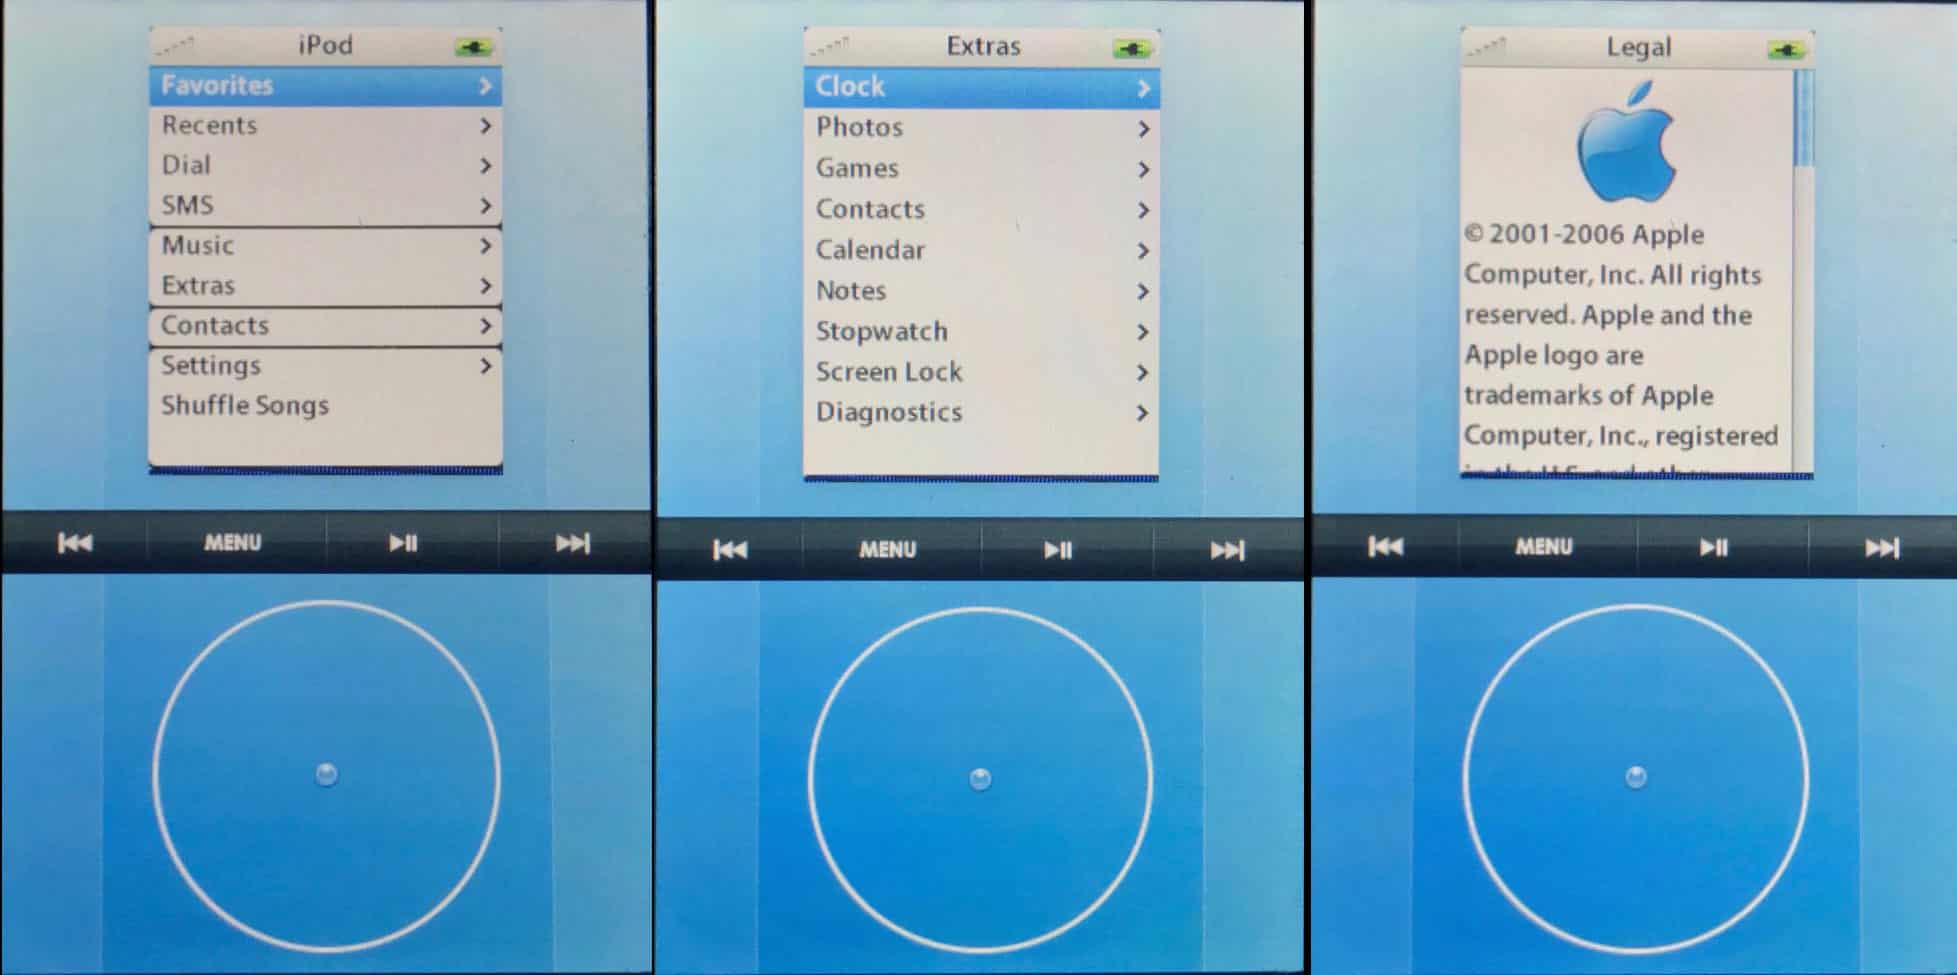 iPod-based iPhone Prototype Revealed in Leaked Video